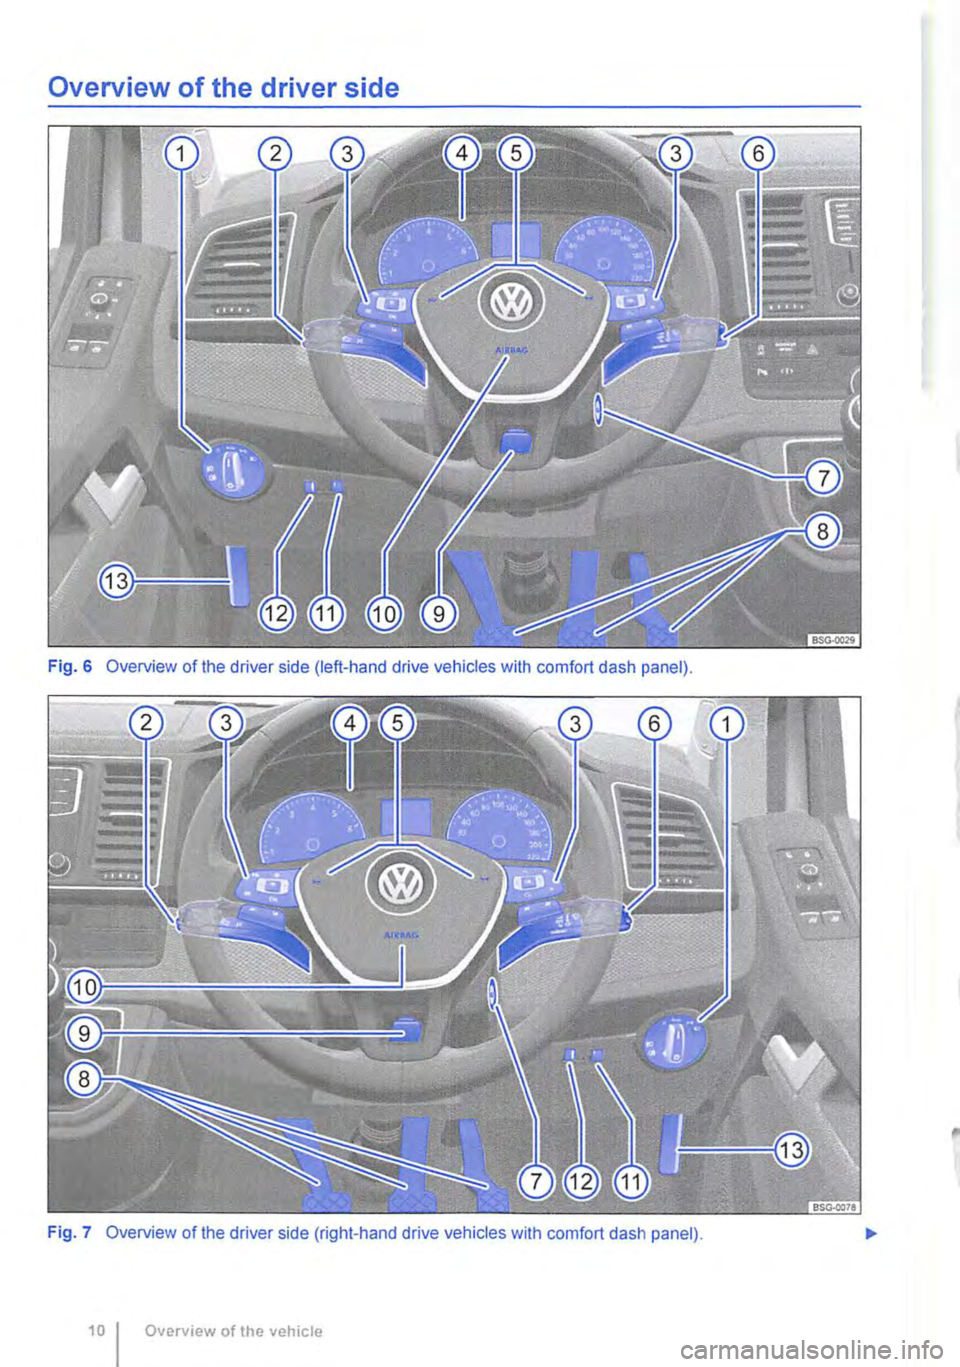 VOLKSWAGEN TRANSPORTER 2020  Owners Manual Overview of the driver side 
Fig. 6 Overview of the driver side (left-hand drive vehicles with comfort dash panel). 
Fig. 7 Overview of the driver side (right-hand drive vehicles with comfort dash pan